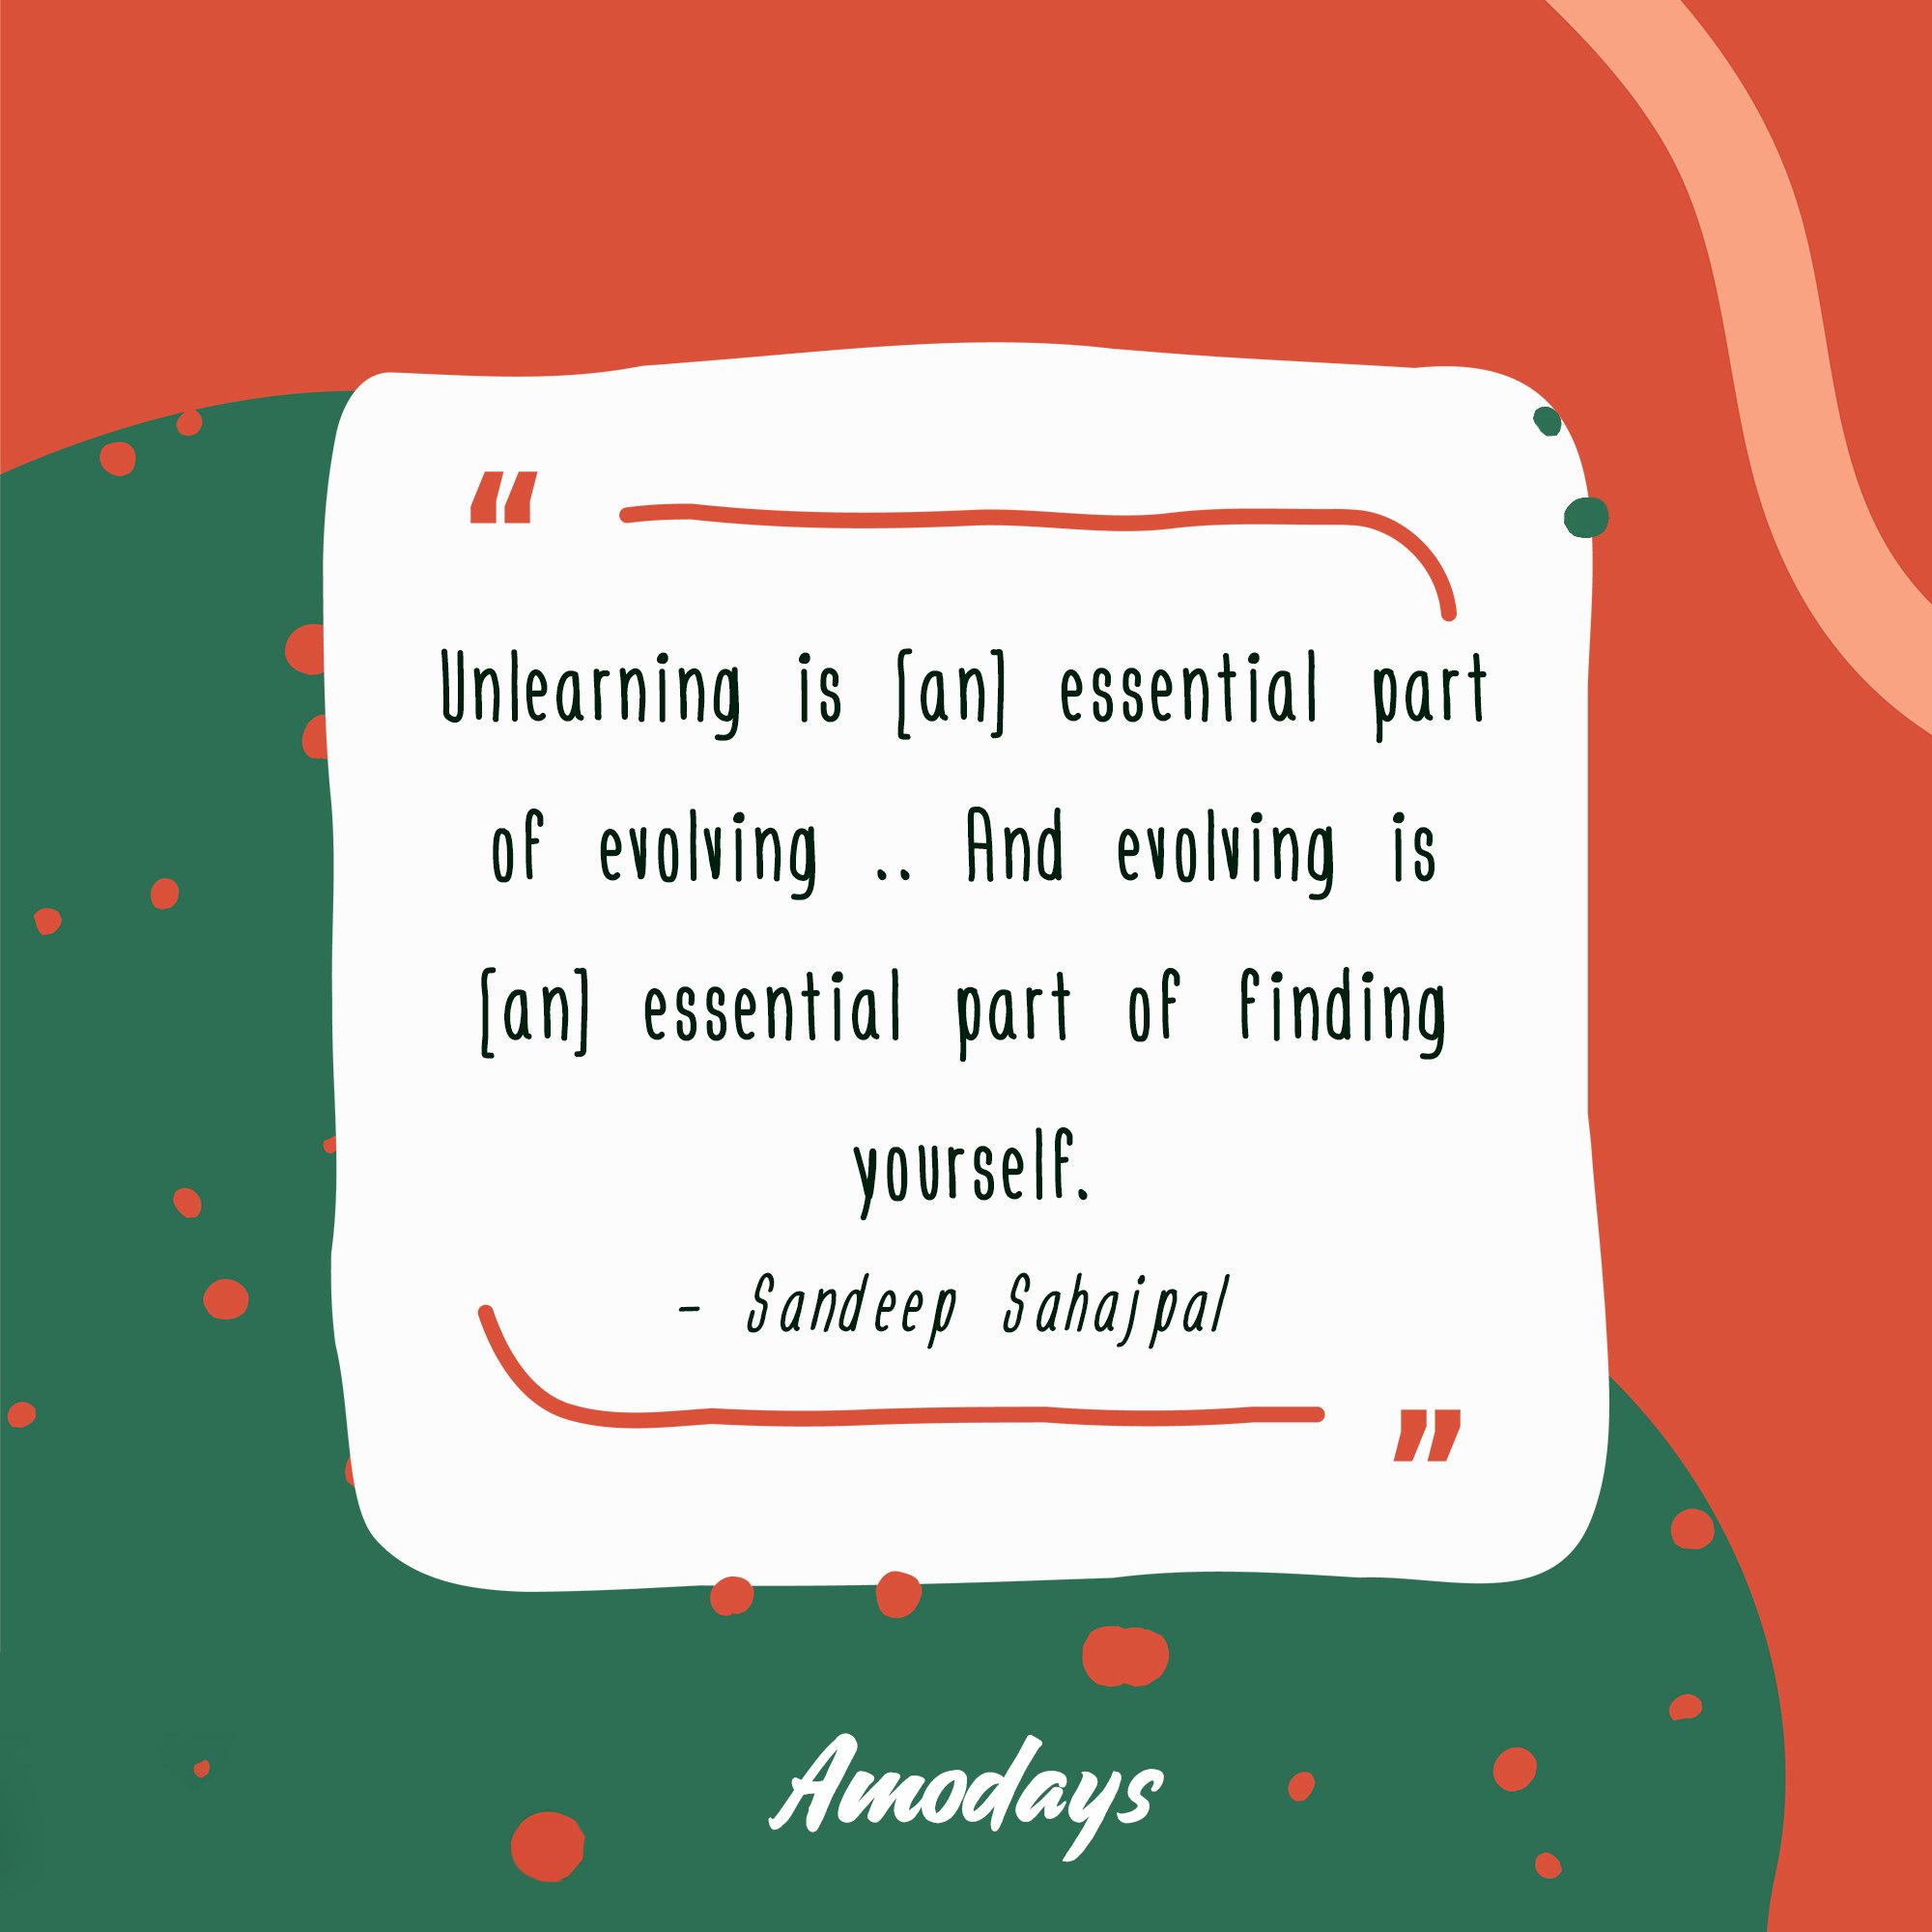 Sandeep Sahajpal's quote "Unlearning is [an] essential part of evolving …. And evolving is [an] essential part of finding yourself." | Image: AmoDays